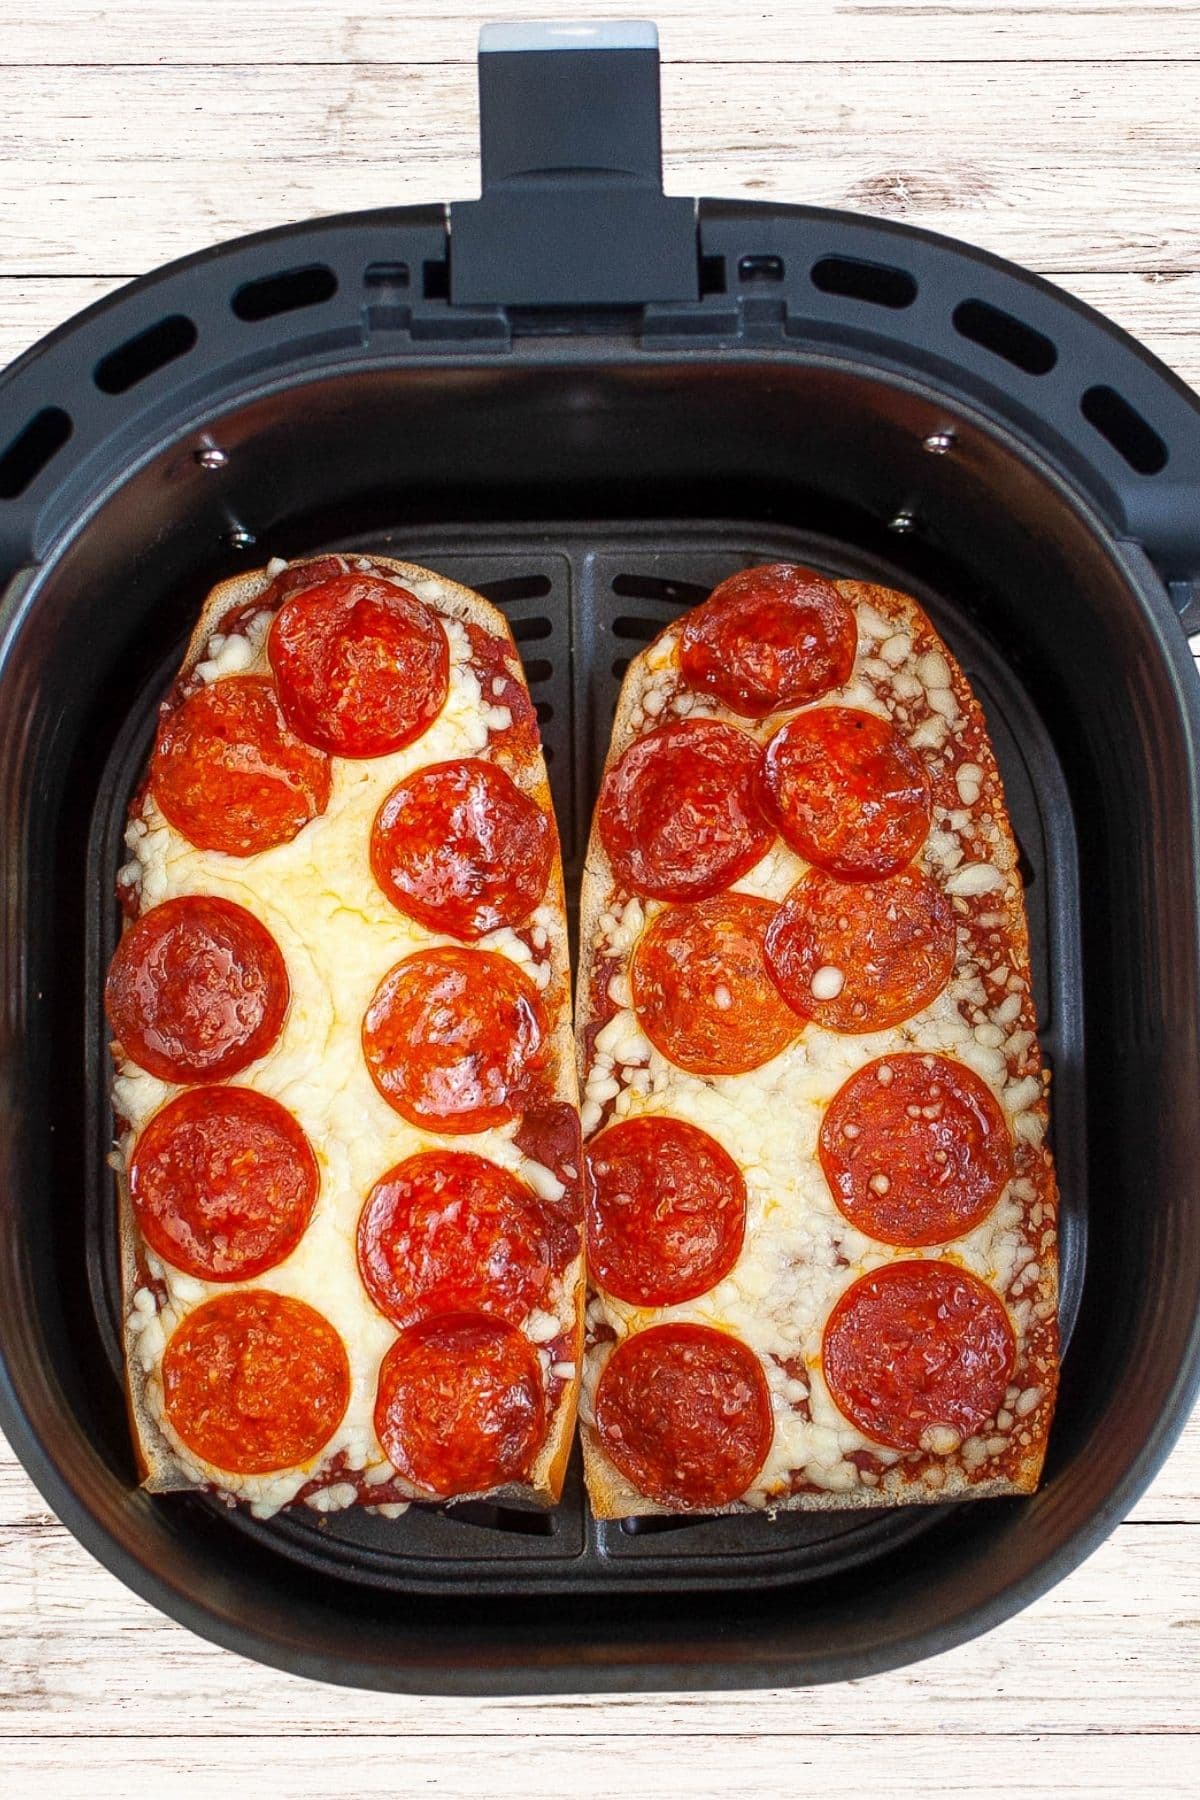 https://www.upstateramblings.com/wp-content/uploads/2022/06/air-fryer-french-bread-pizza.jpg